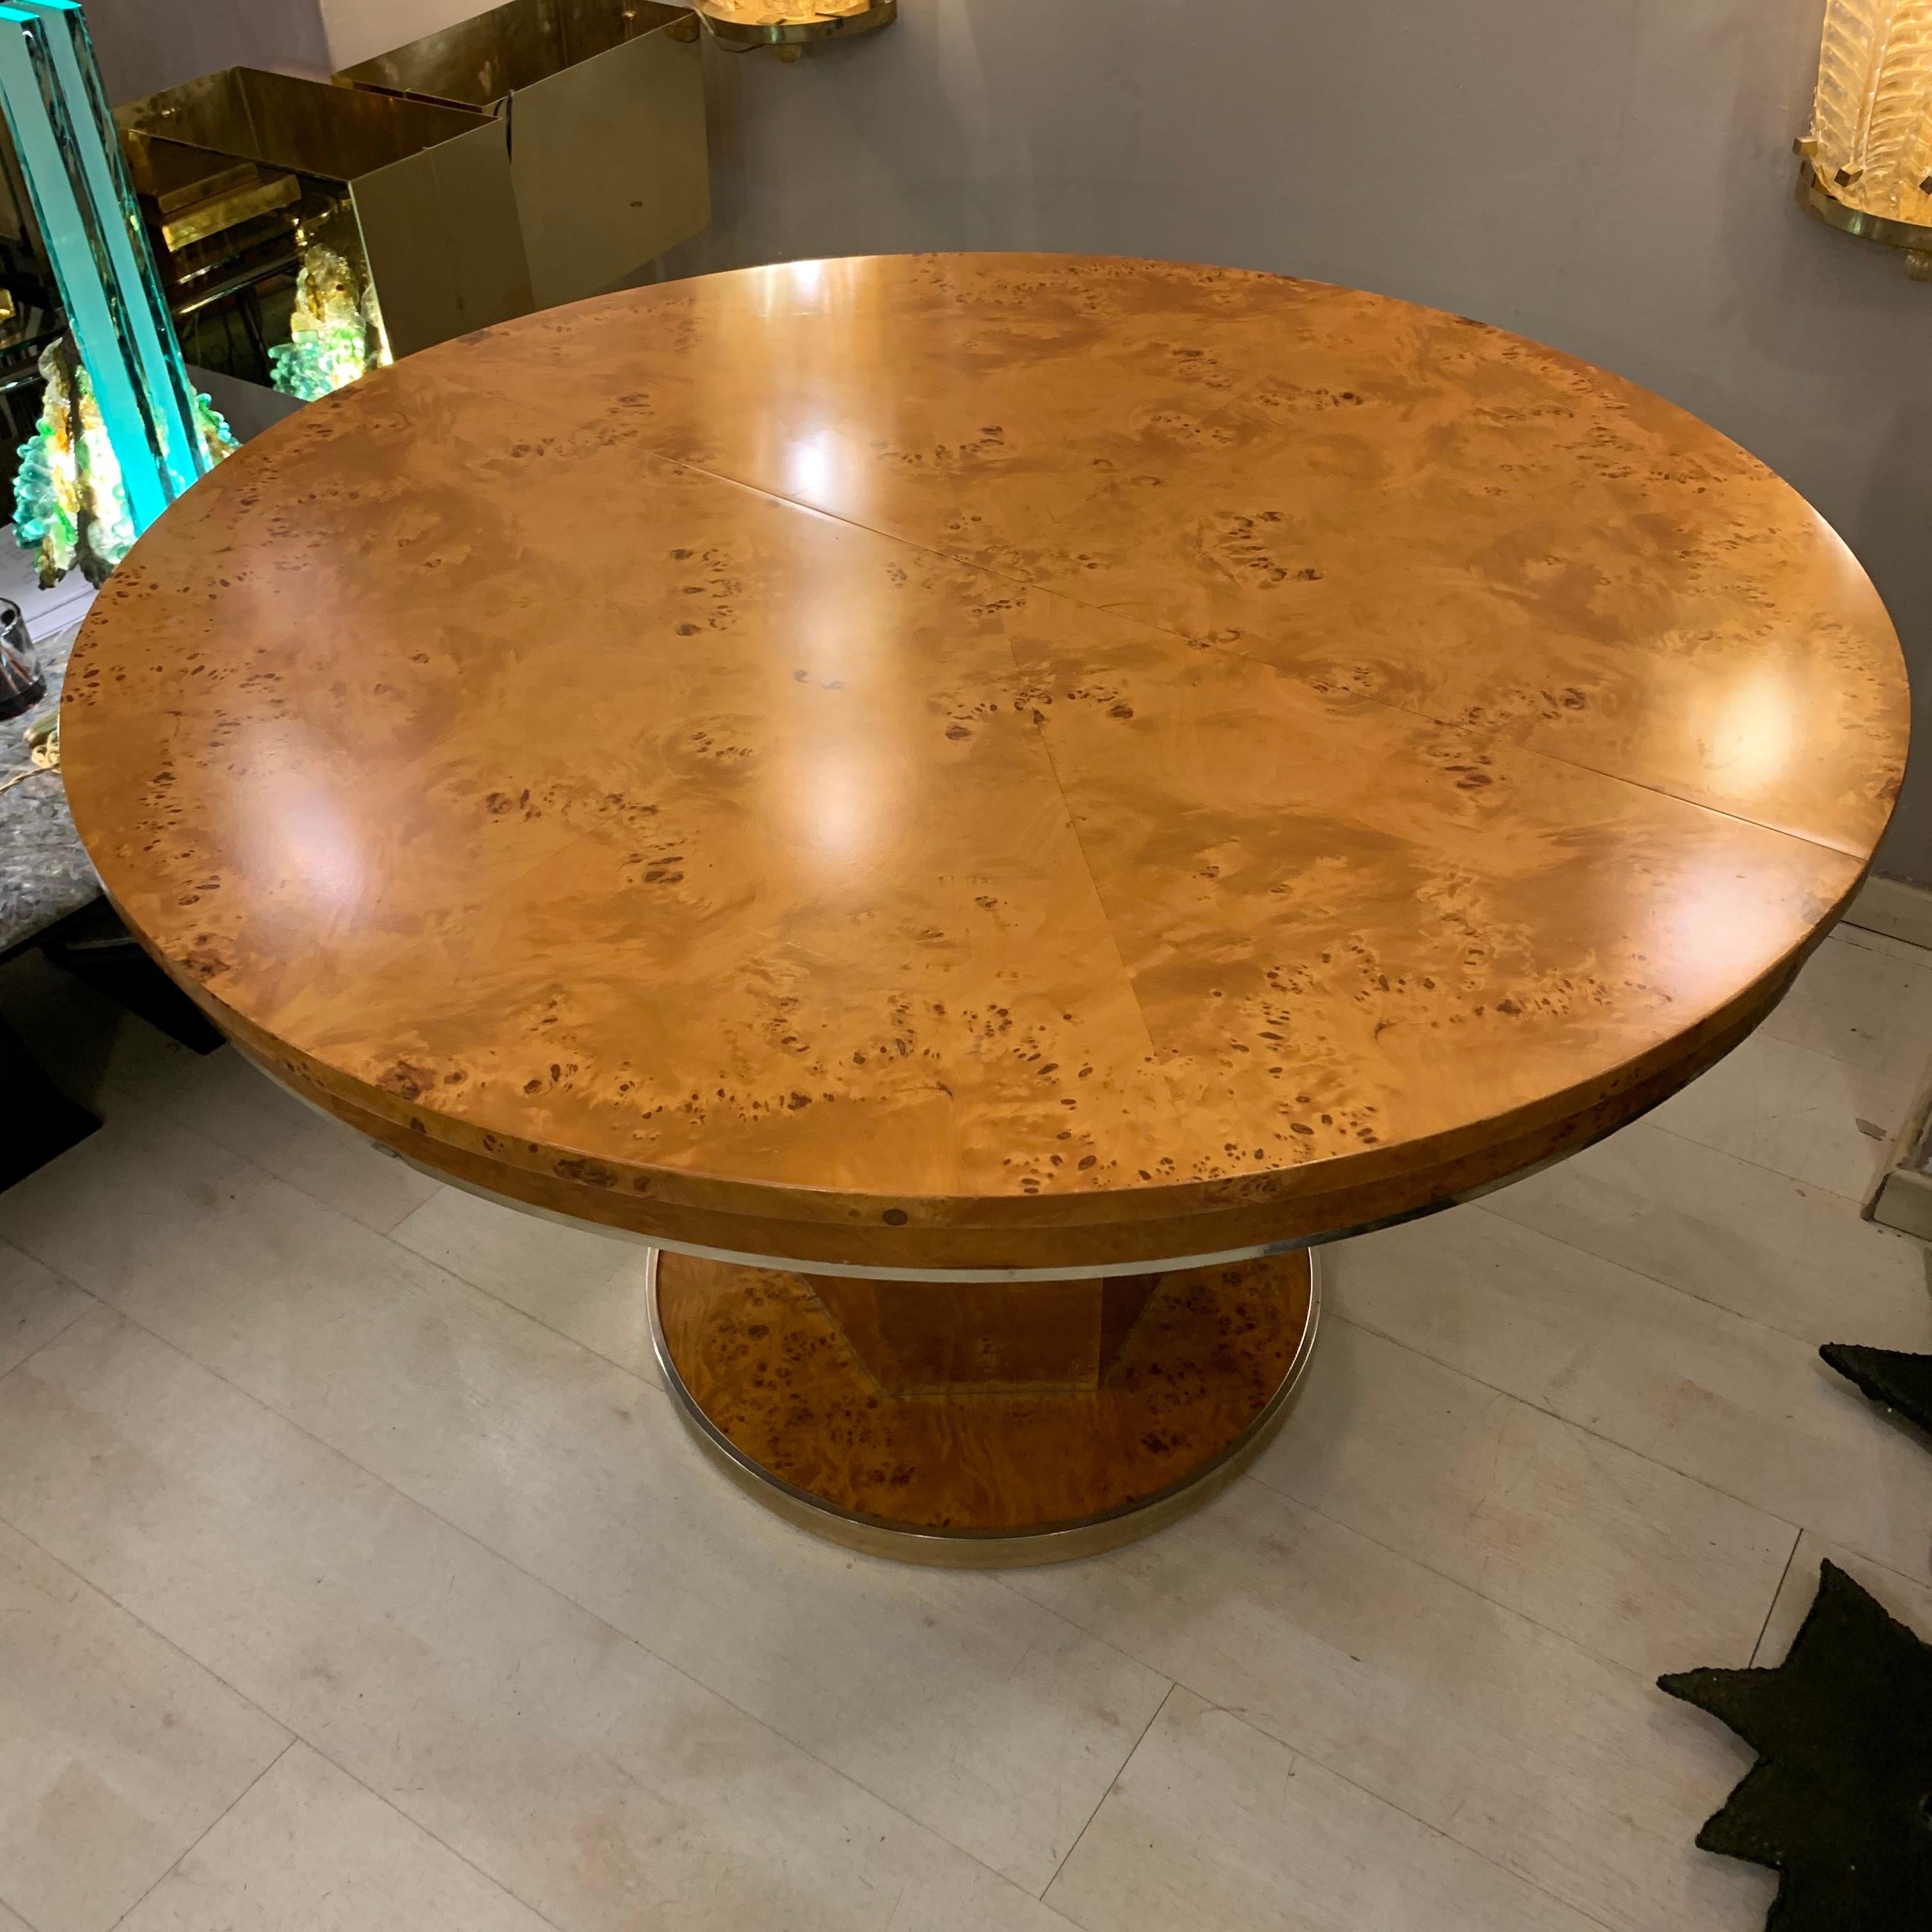 Round burl wood dining table with central pedestal base by j. C. Mahey, 1980s Jean-Claude Mahey round burl wood extendable dining table with central pedestal base and brass details.
Measurements with extension: 120 x 160 x 73.